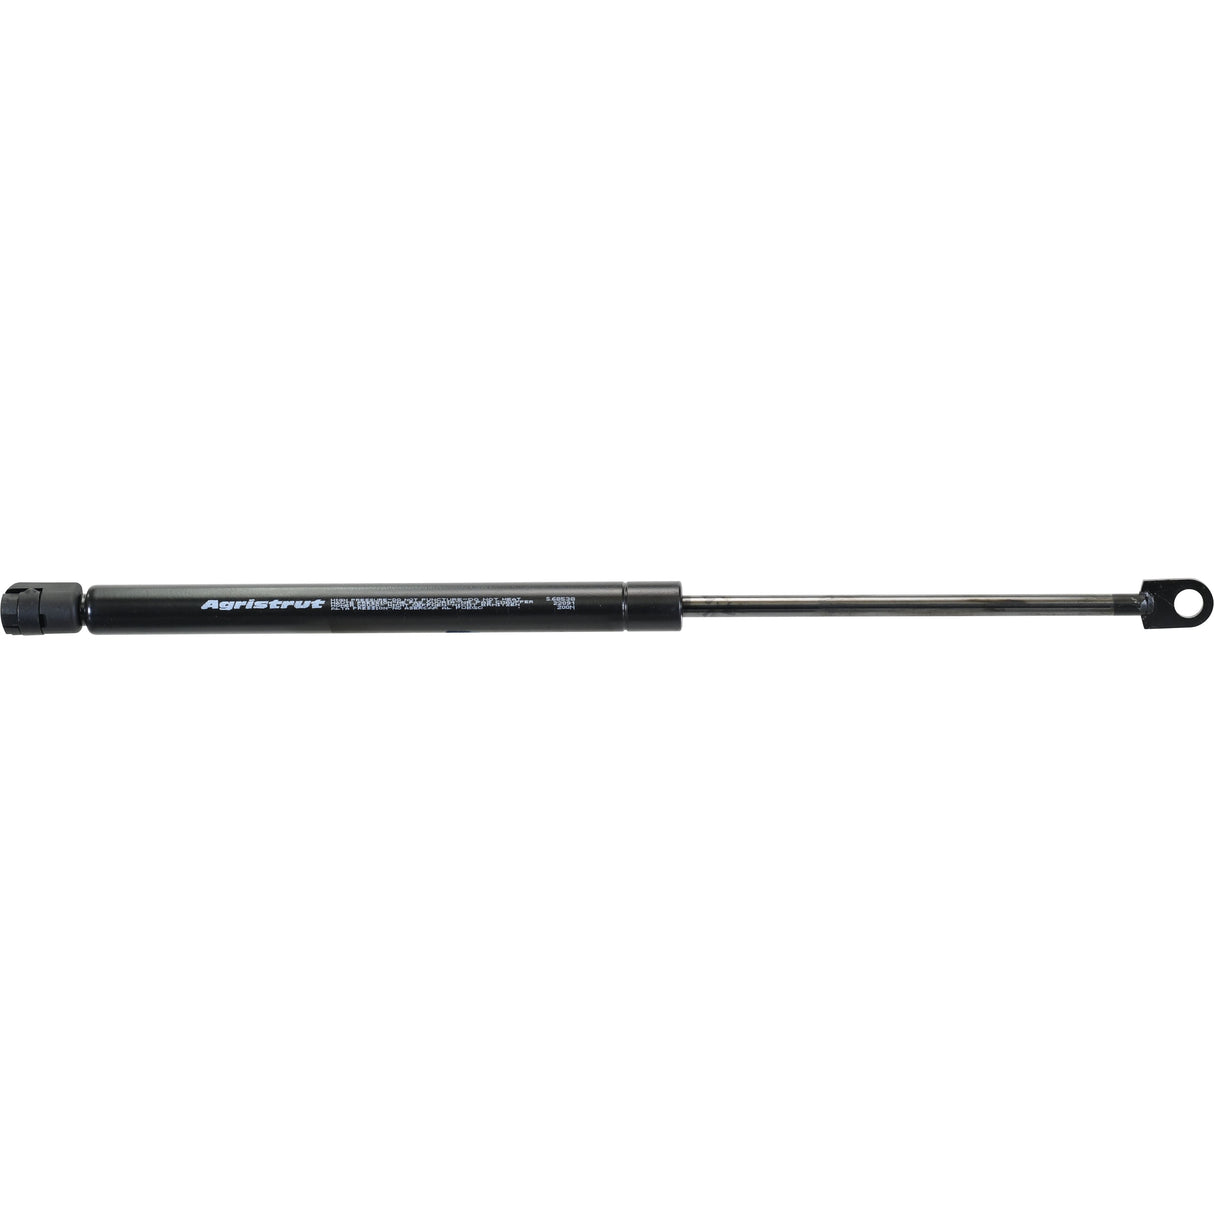 Gas Strut,  Total length: 415mm
 - S.68538 - Massey Tractor Parts